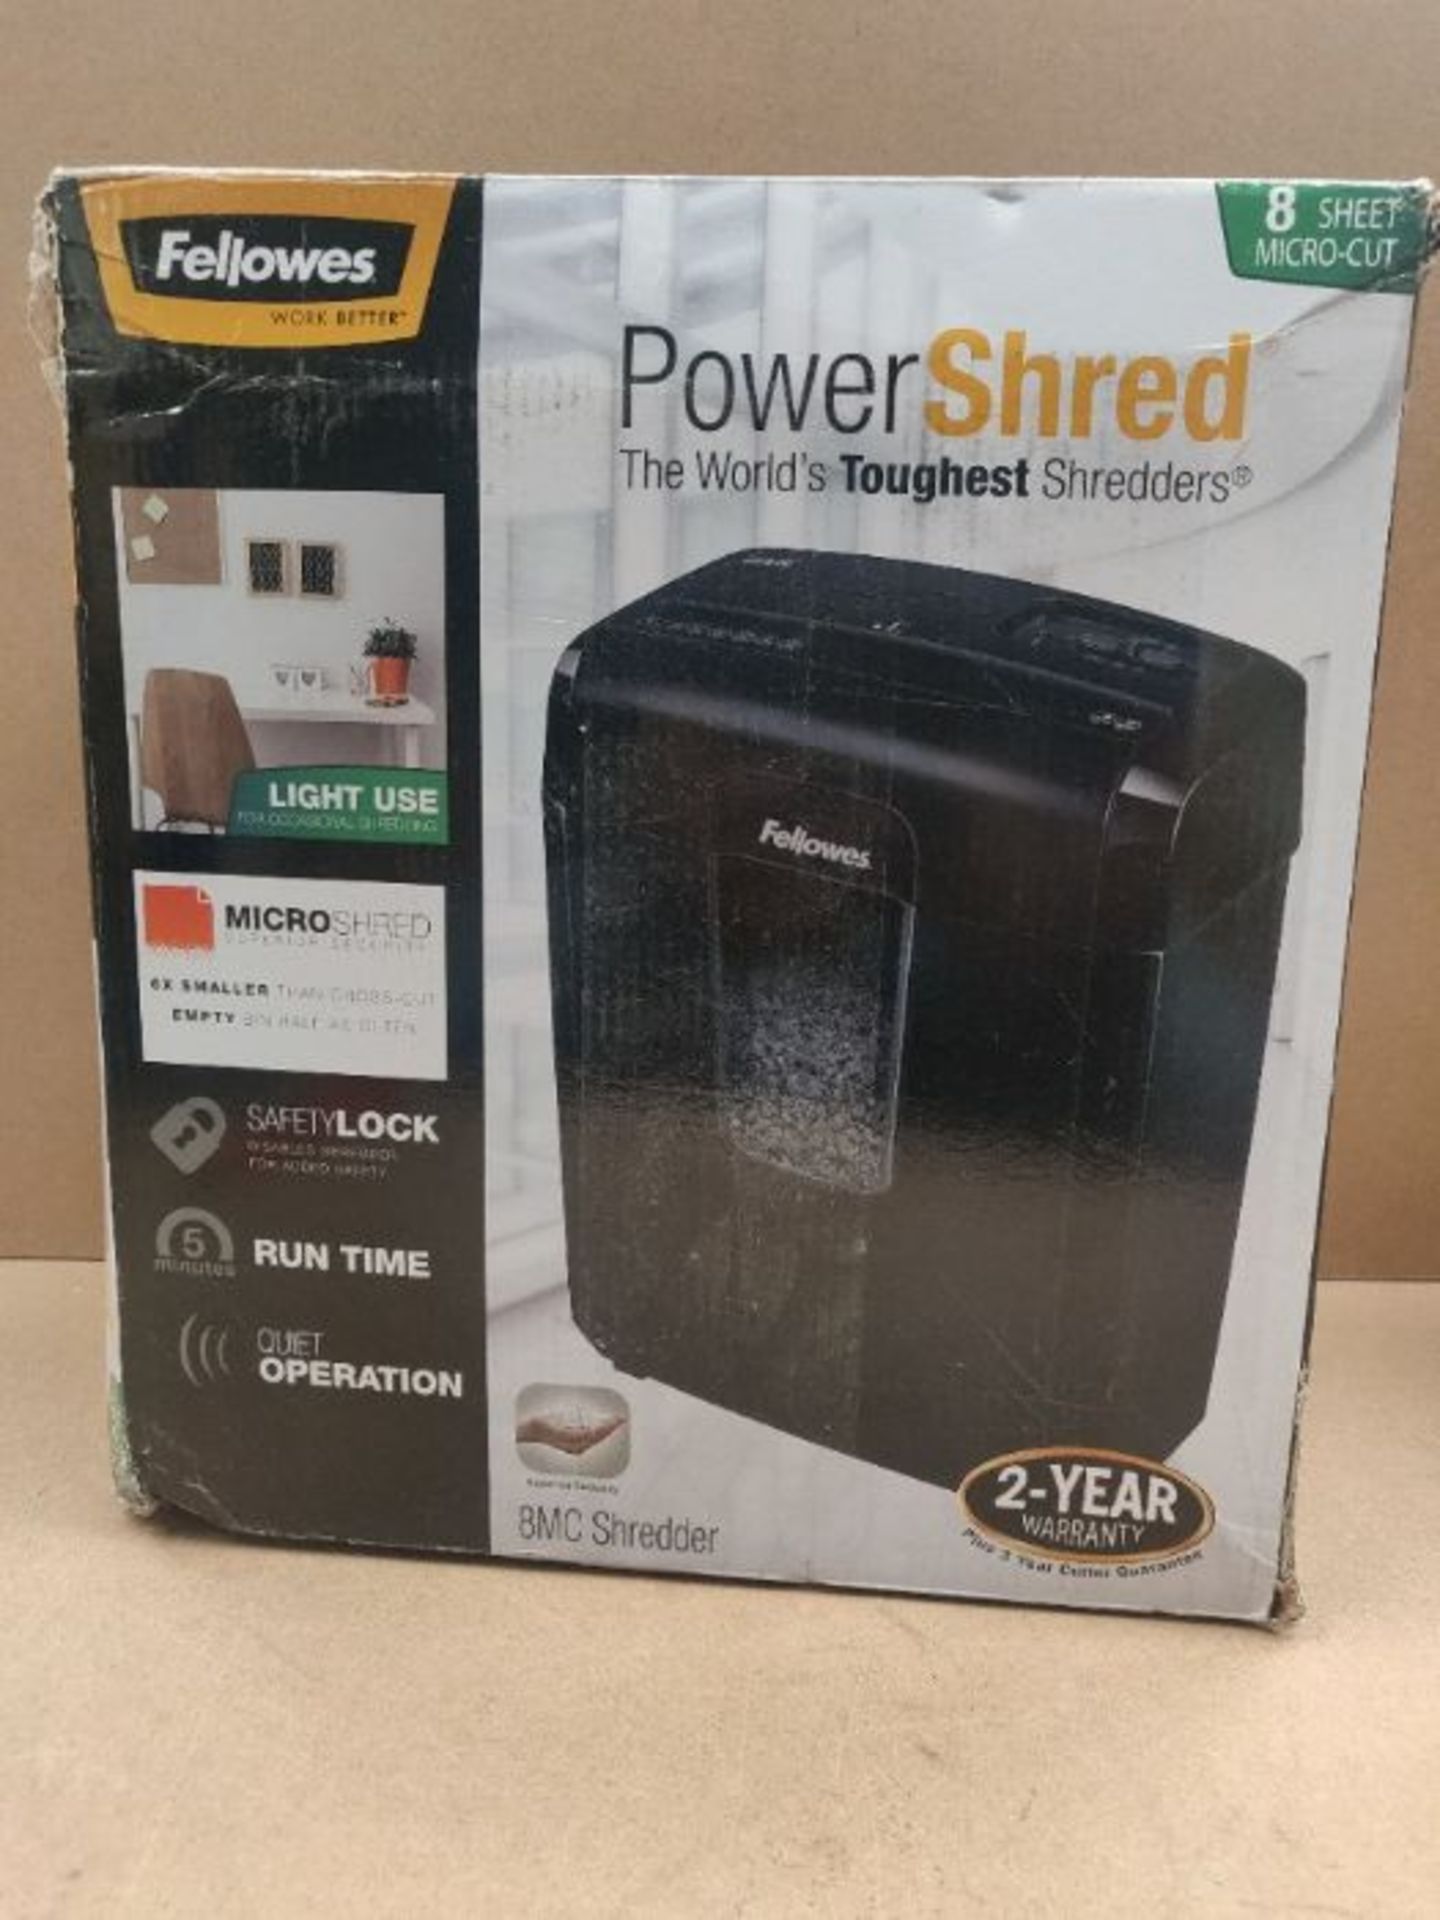 RRP £55.00 Fellowes Powershred 8Mc, 8 Sheet Micro-Cut Personal Paper Shredder with Safety Lock fo - Image 2 of 3